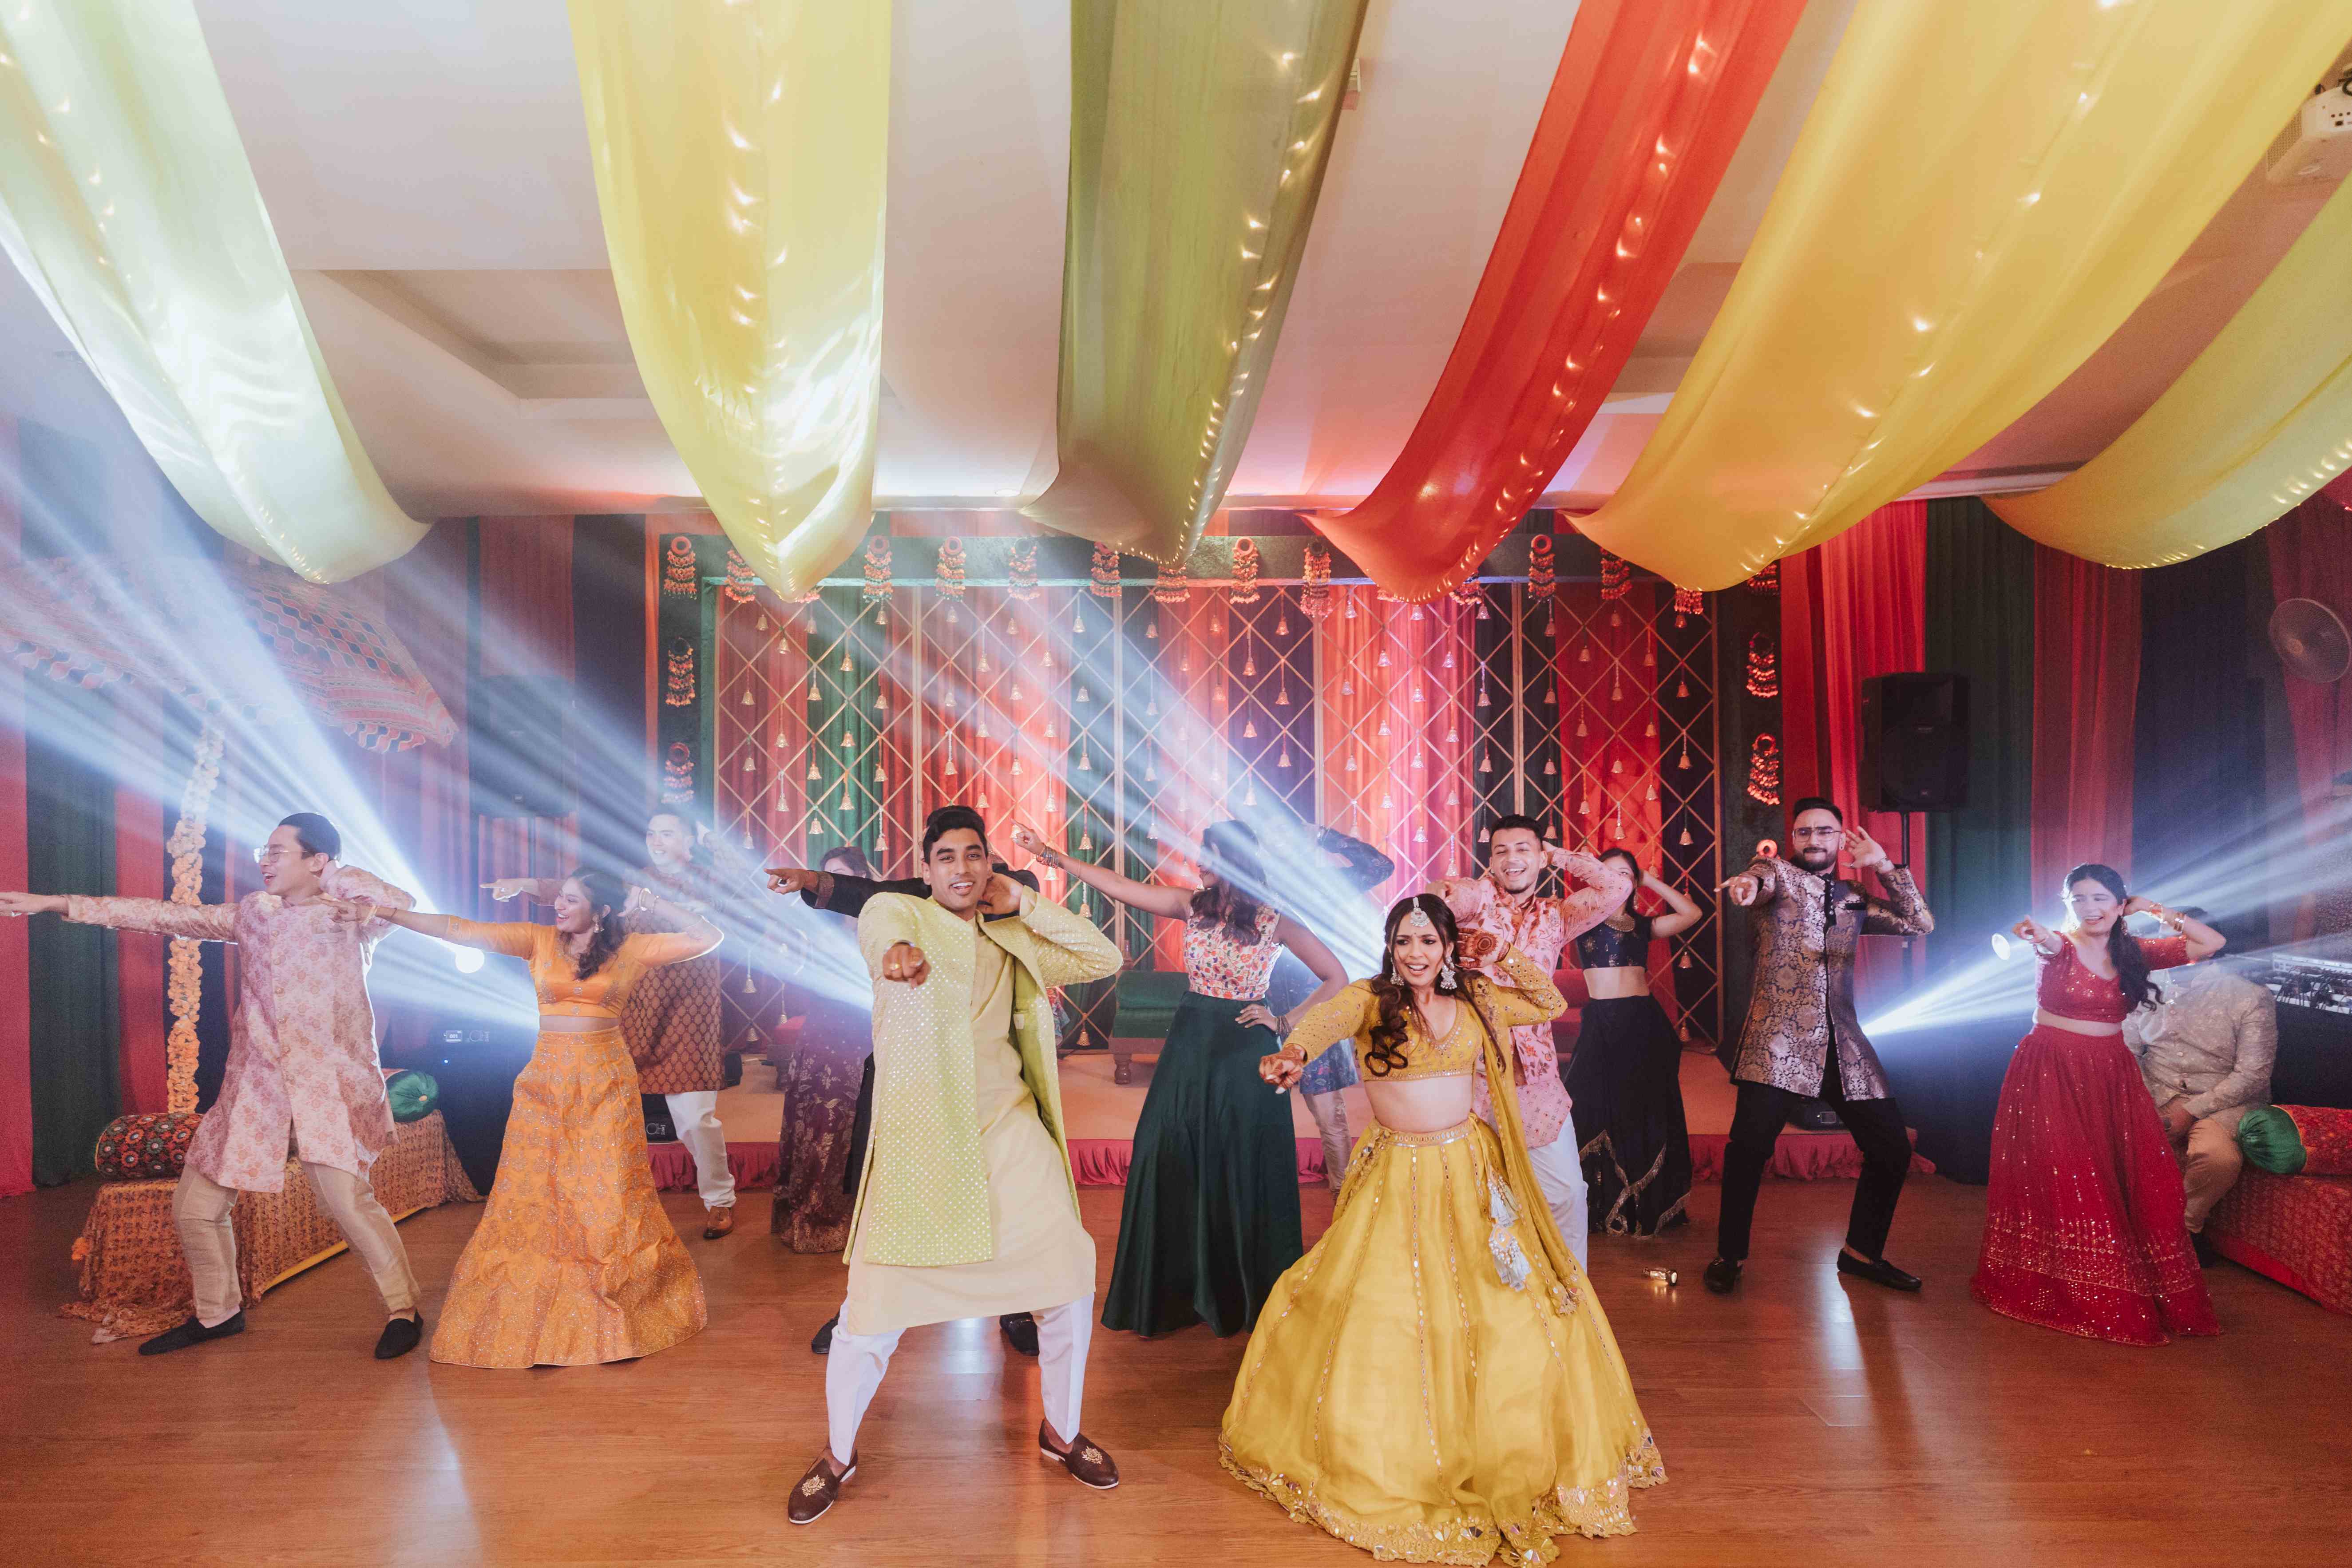 This Multicultural Wedding In Malaysia Was Full Of Candid Moments